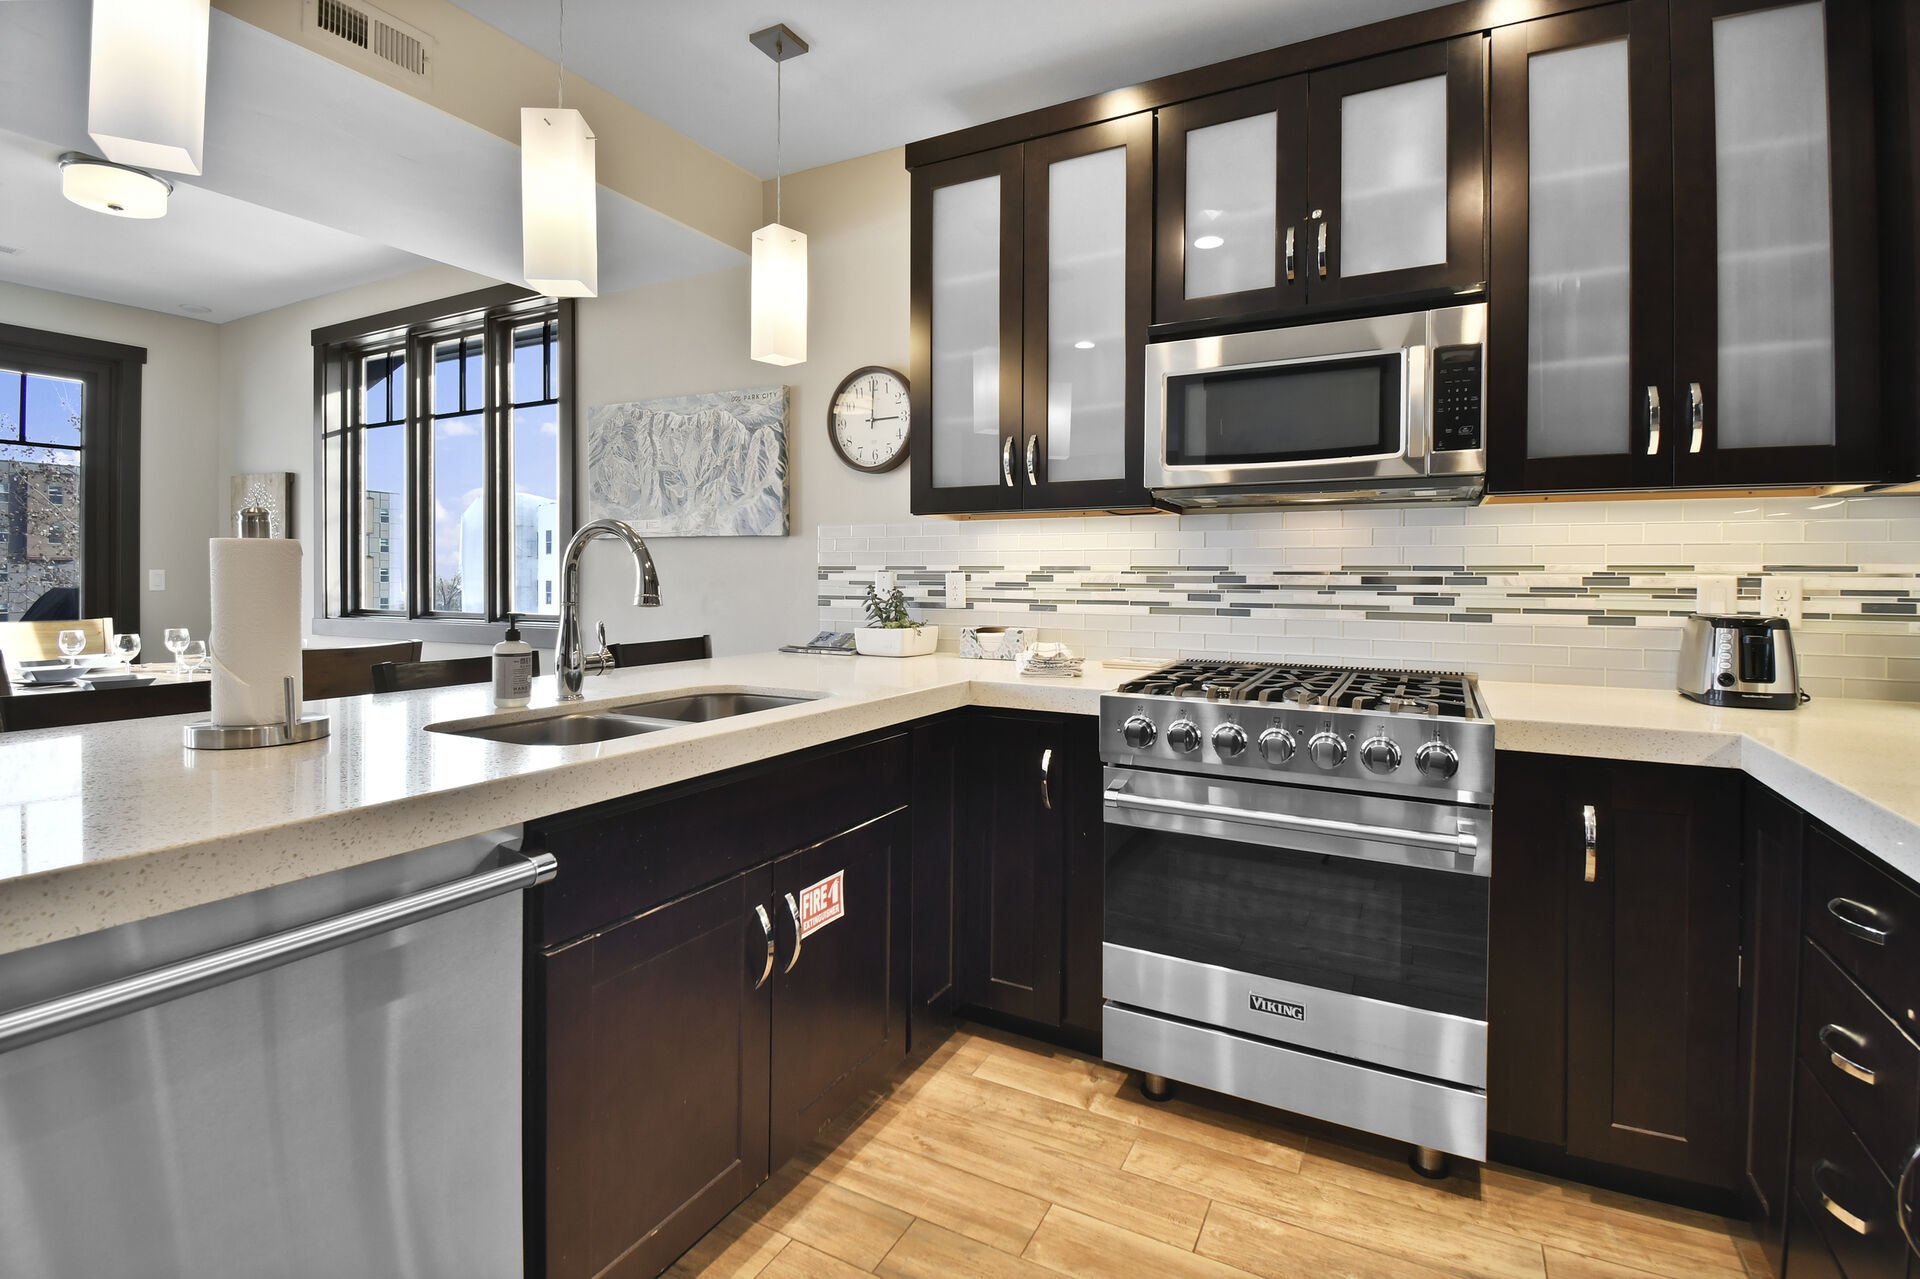 Kitchen with high-end appliances, gas burning stovetop